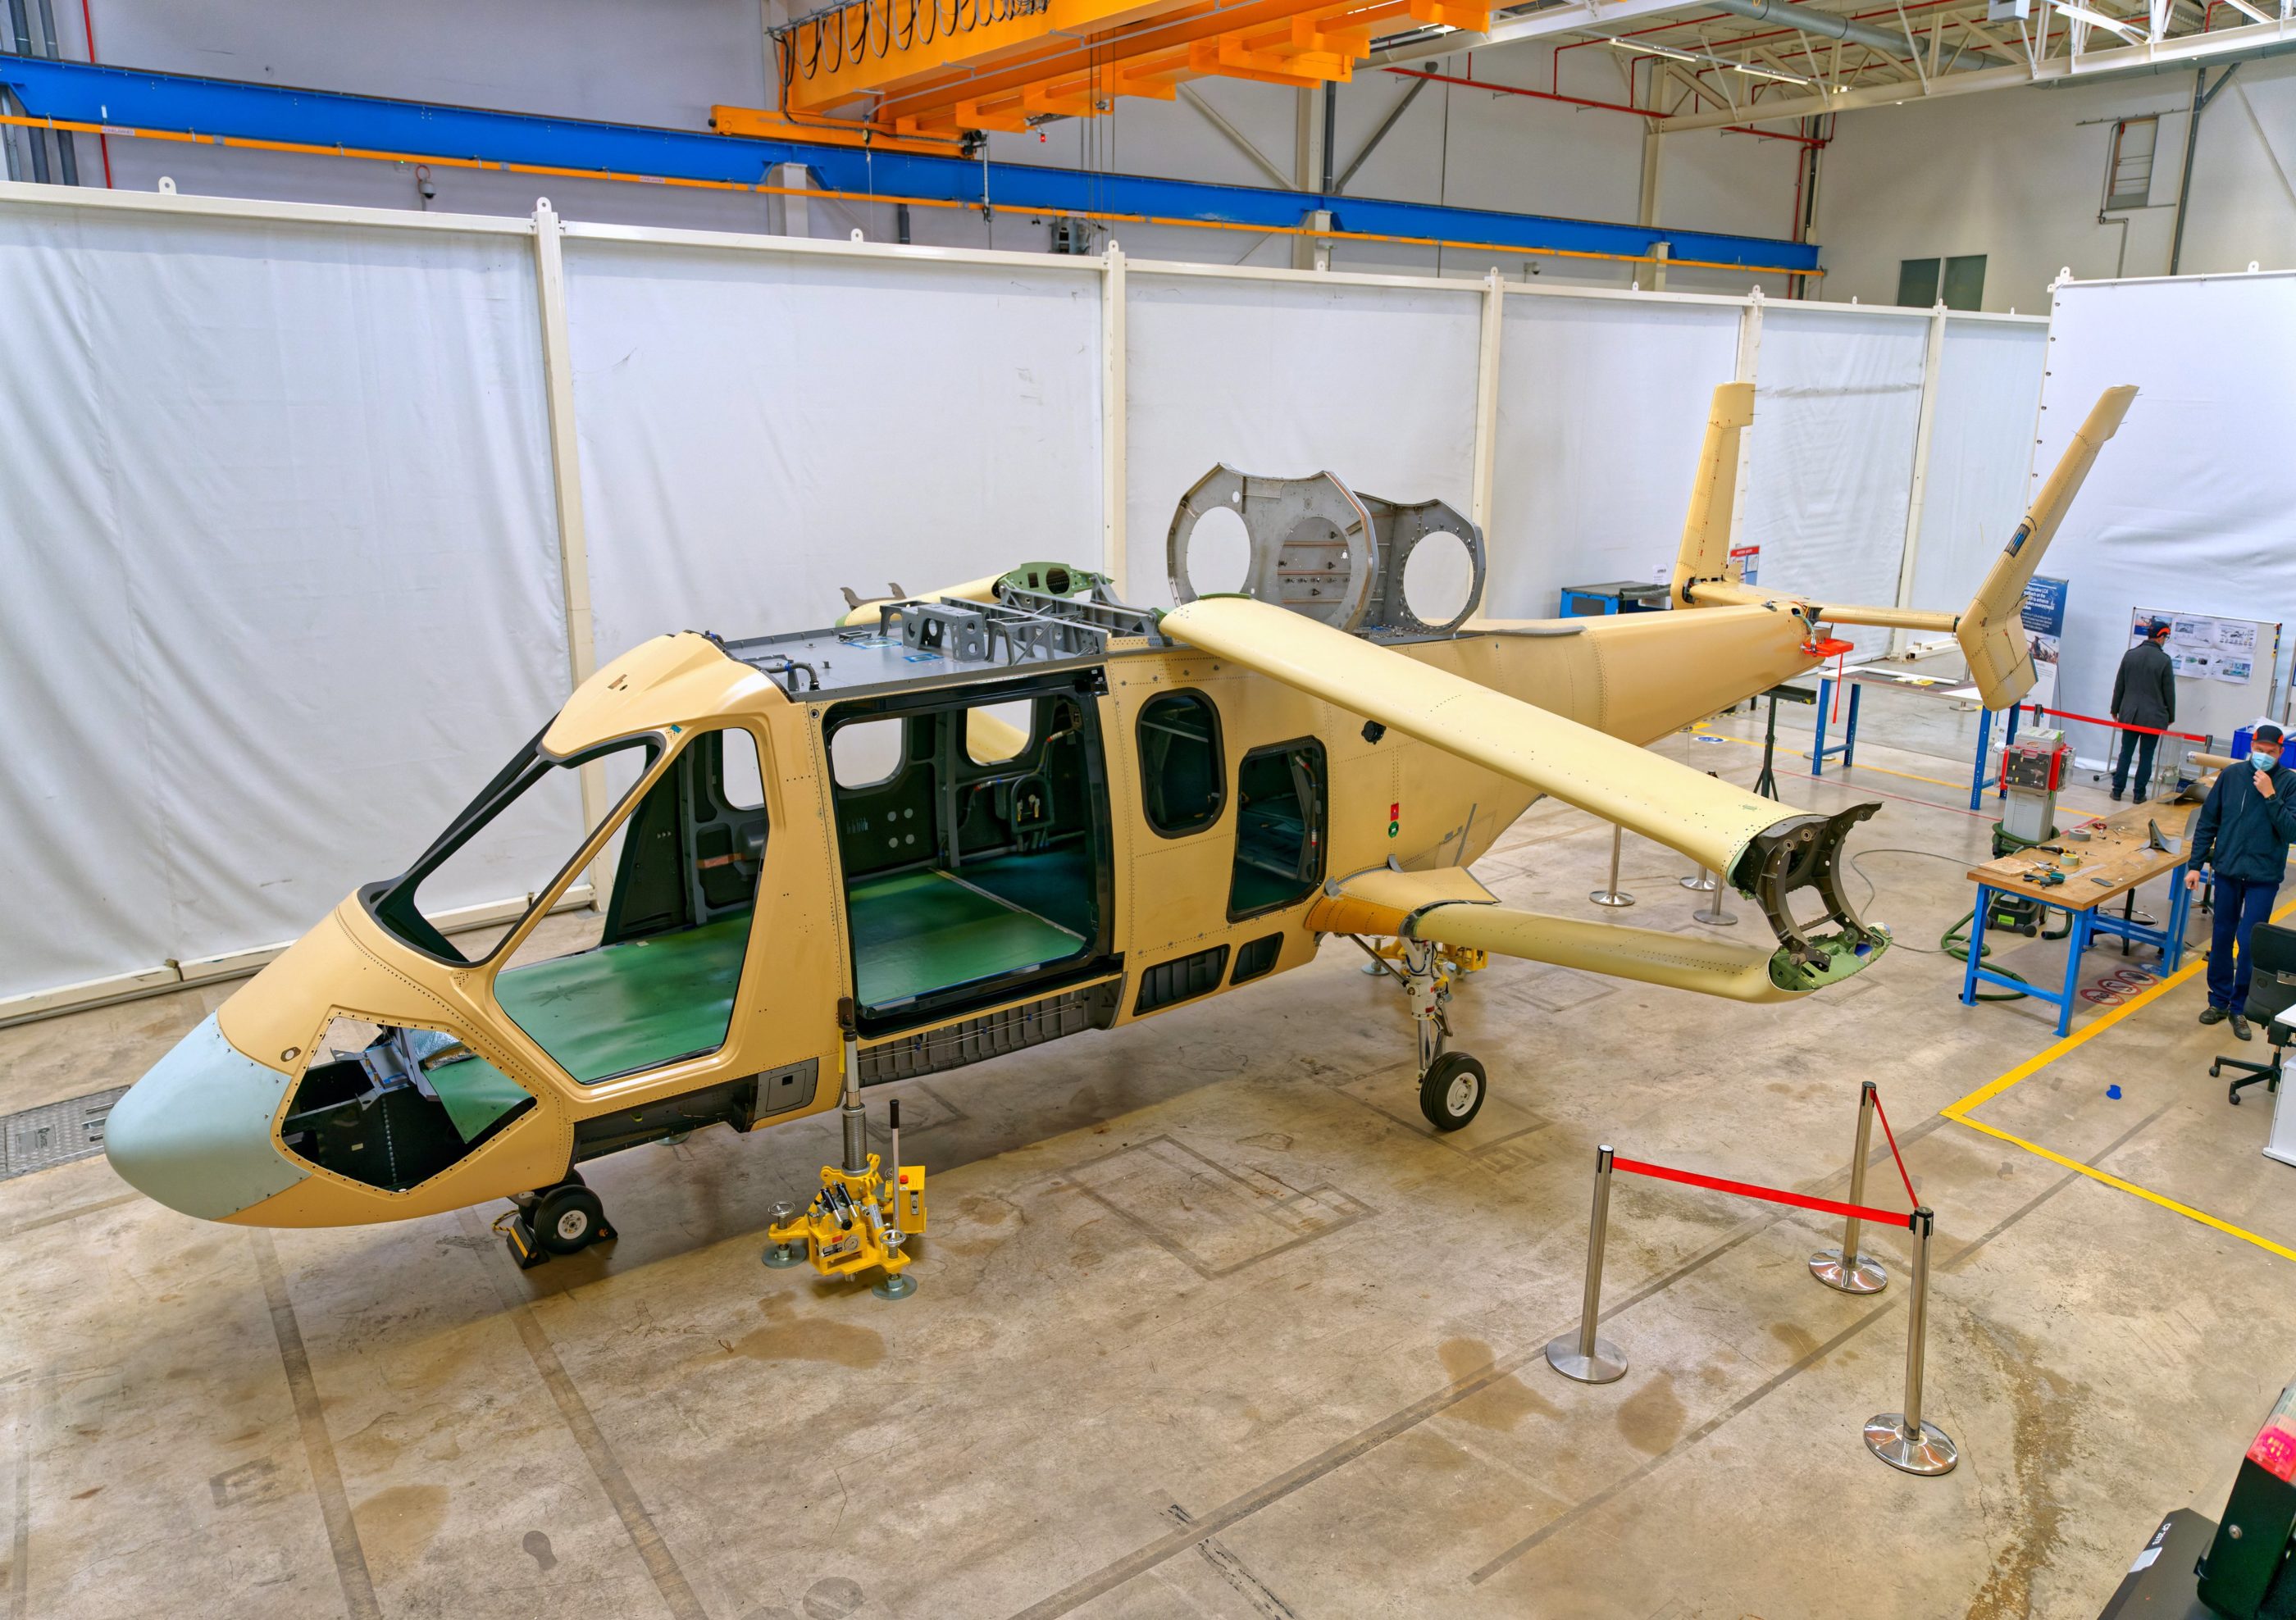 Airbus assembling Racer; targets flight this year